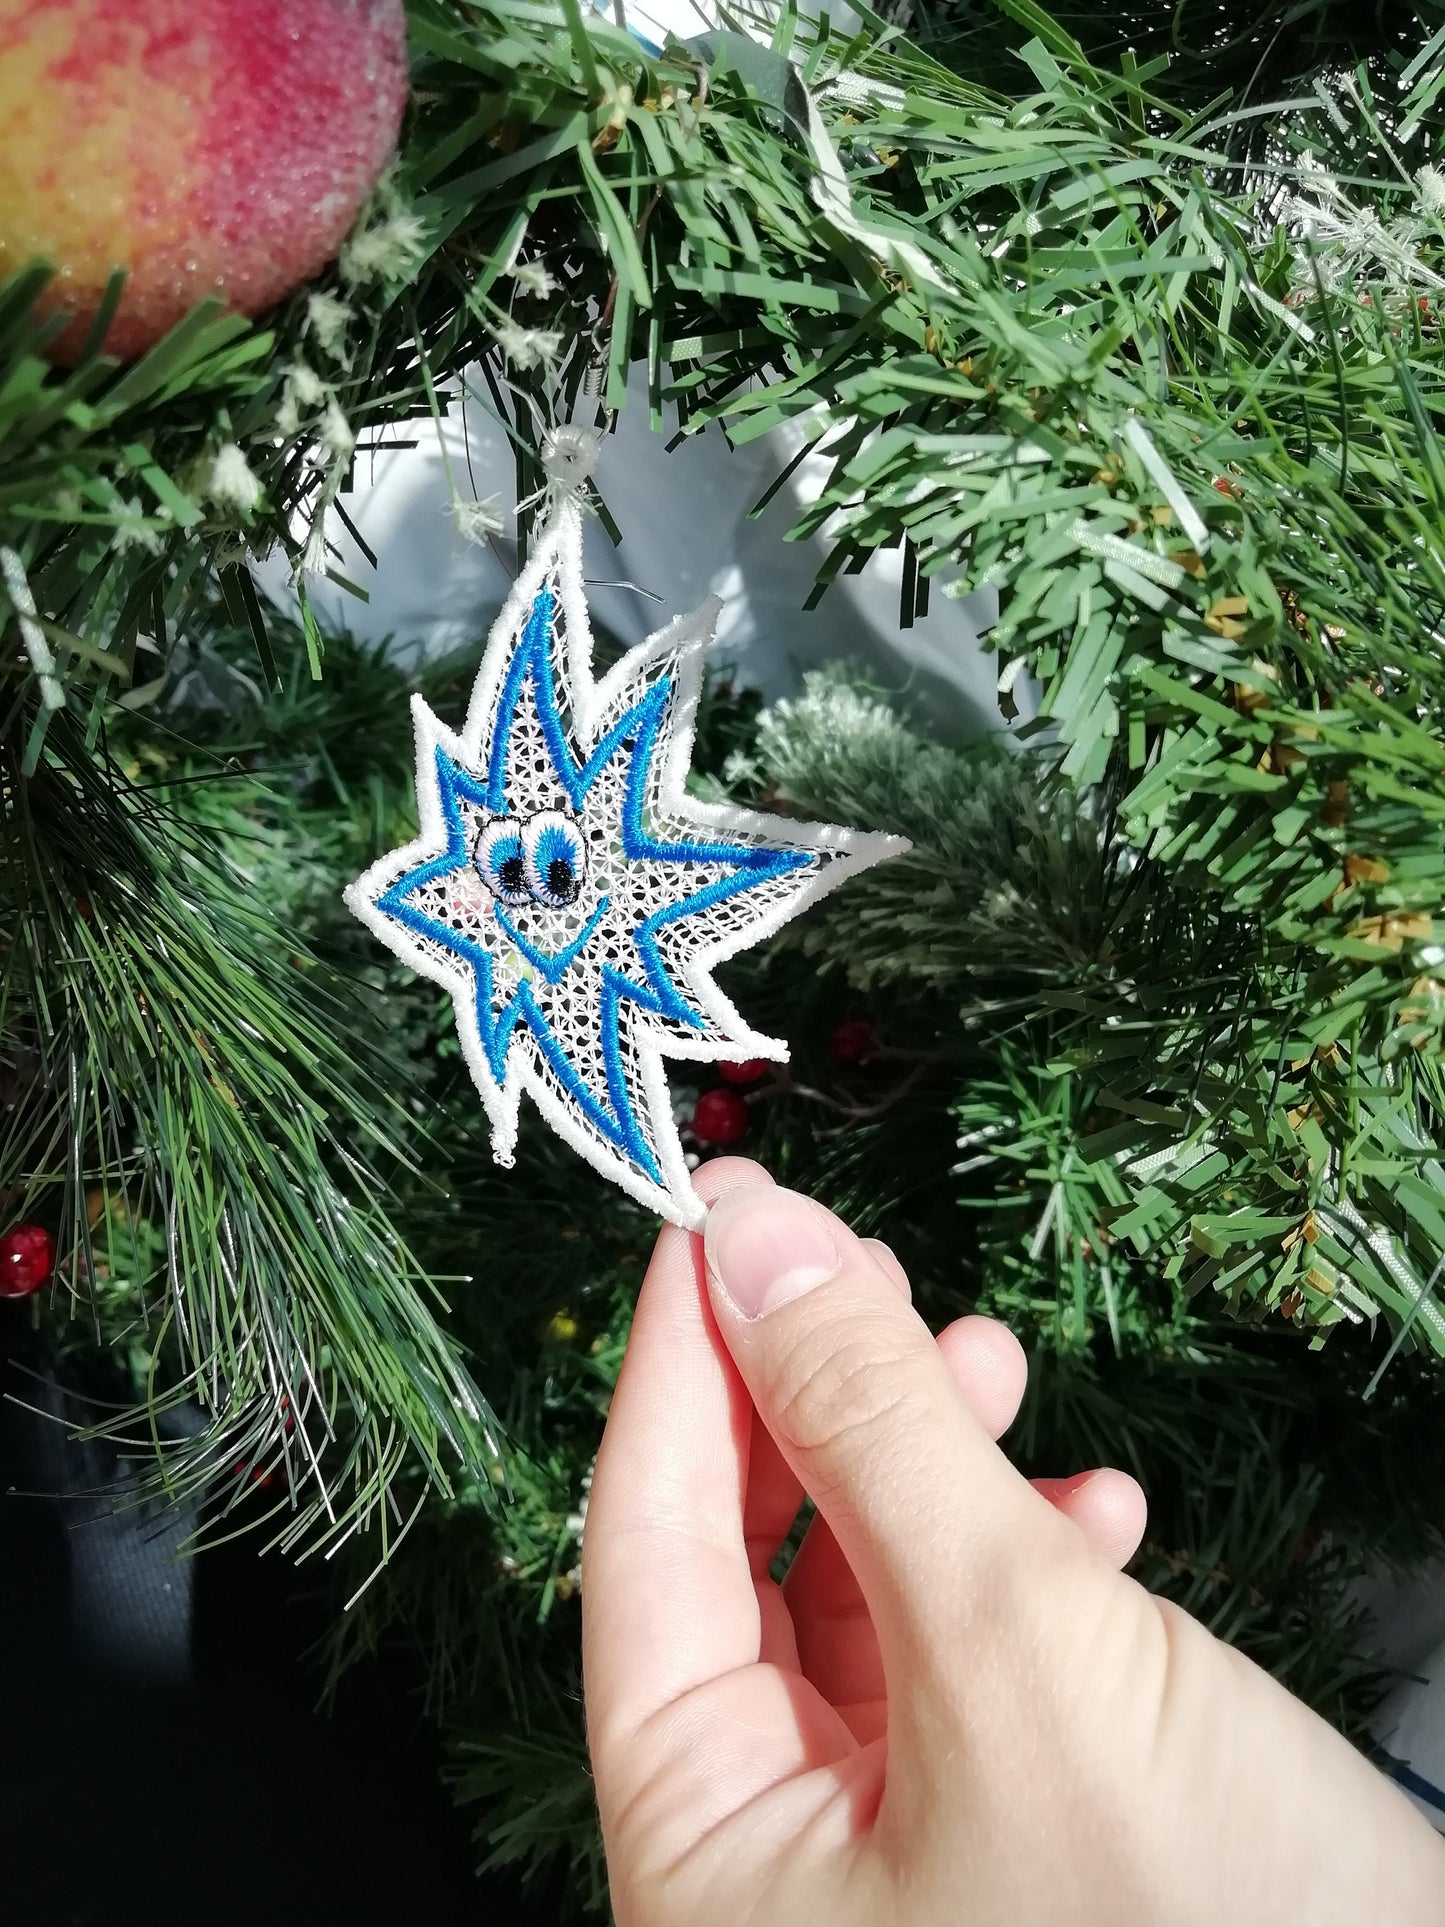 Funny Stars ornament, Christmas ornament, Happy stars, Happy thoughts, decorations,